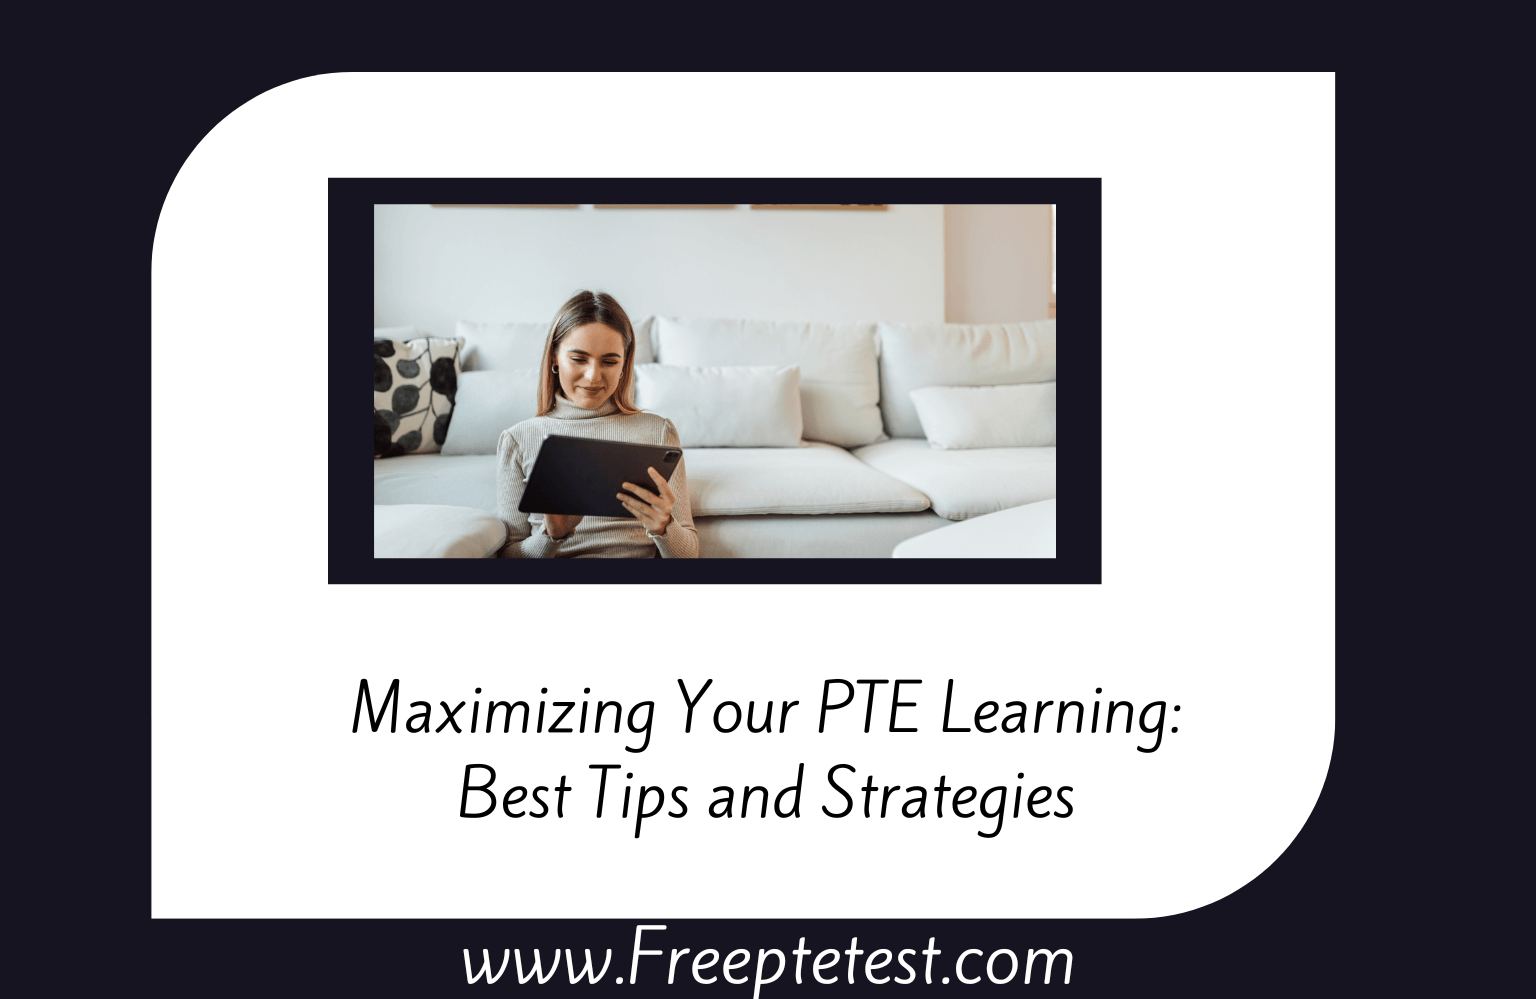 Maximizing Your PTE Learning: Best Tips and Strategies